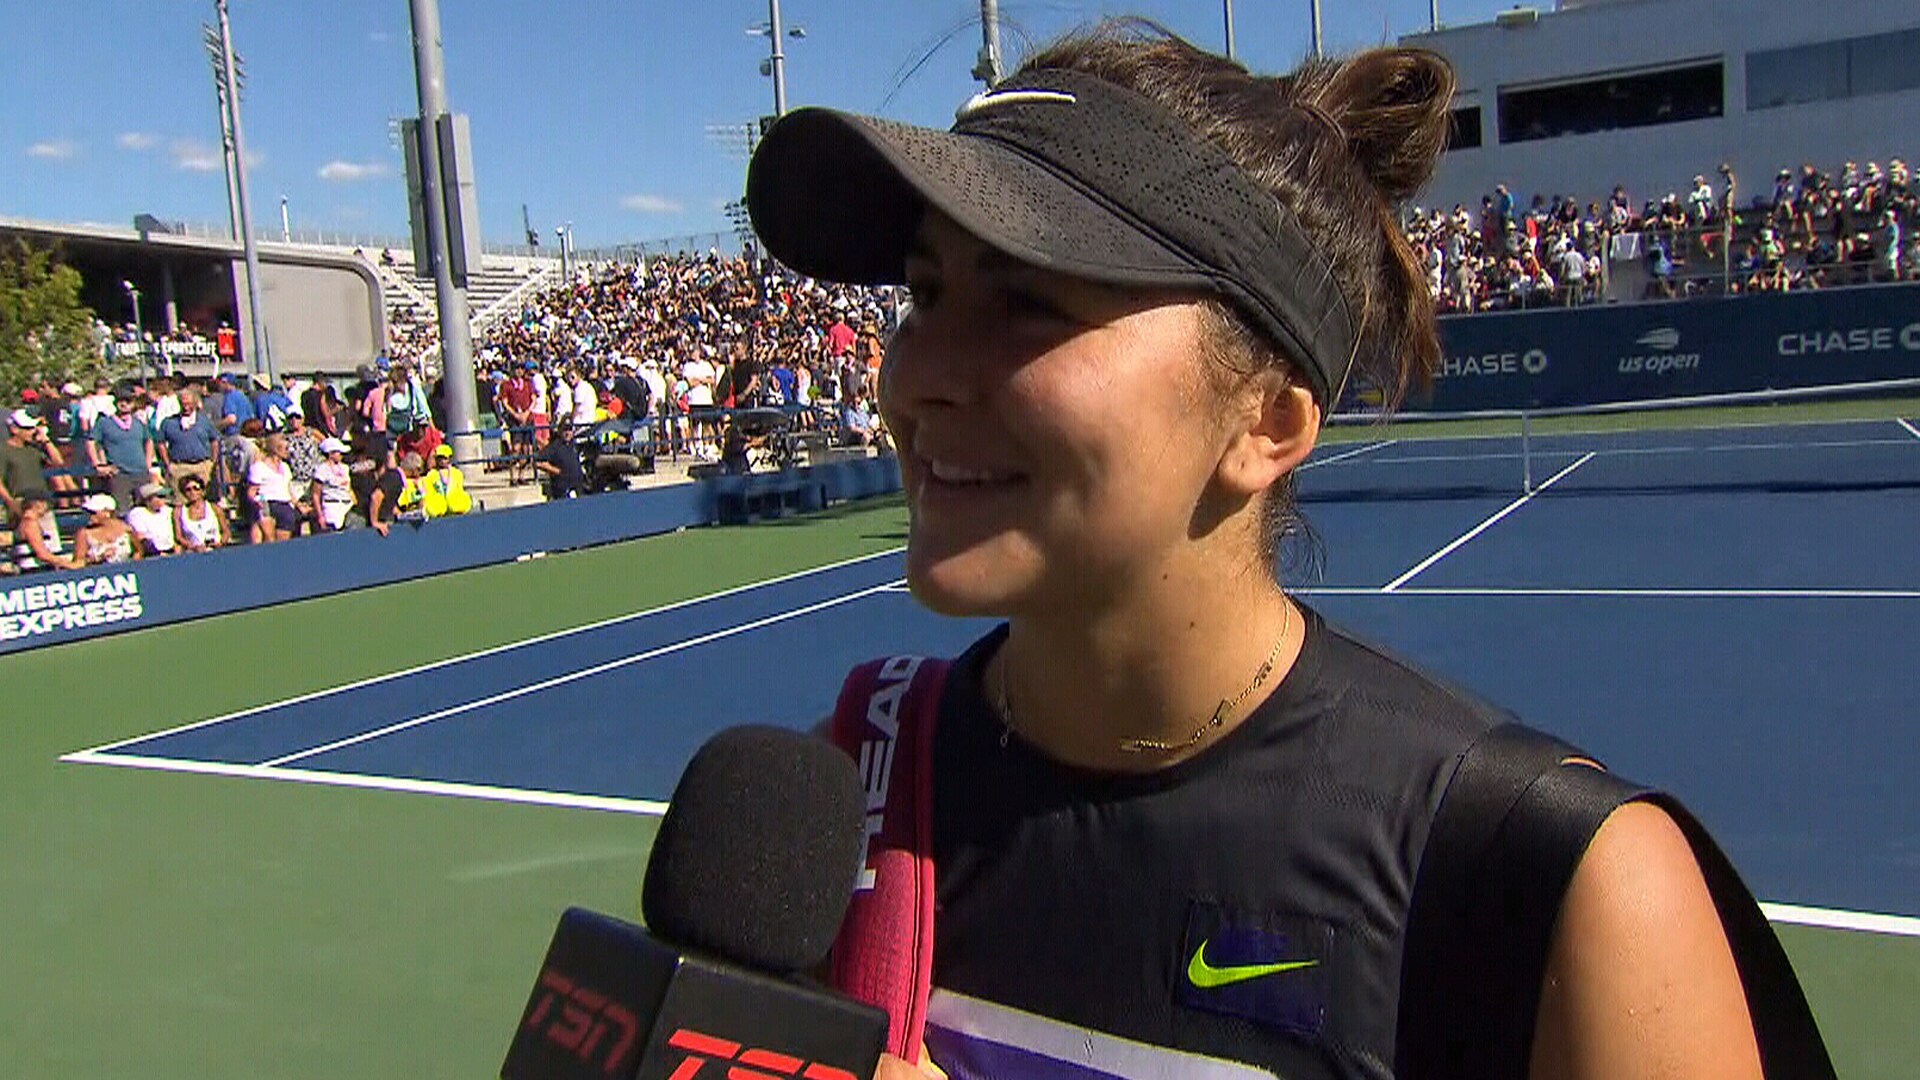 Andreescu Advances To Third Round At Us Open With Win Over Flipkens Ctv News 